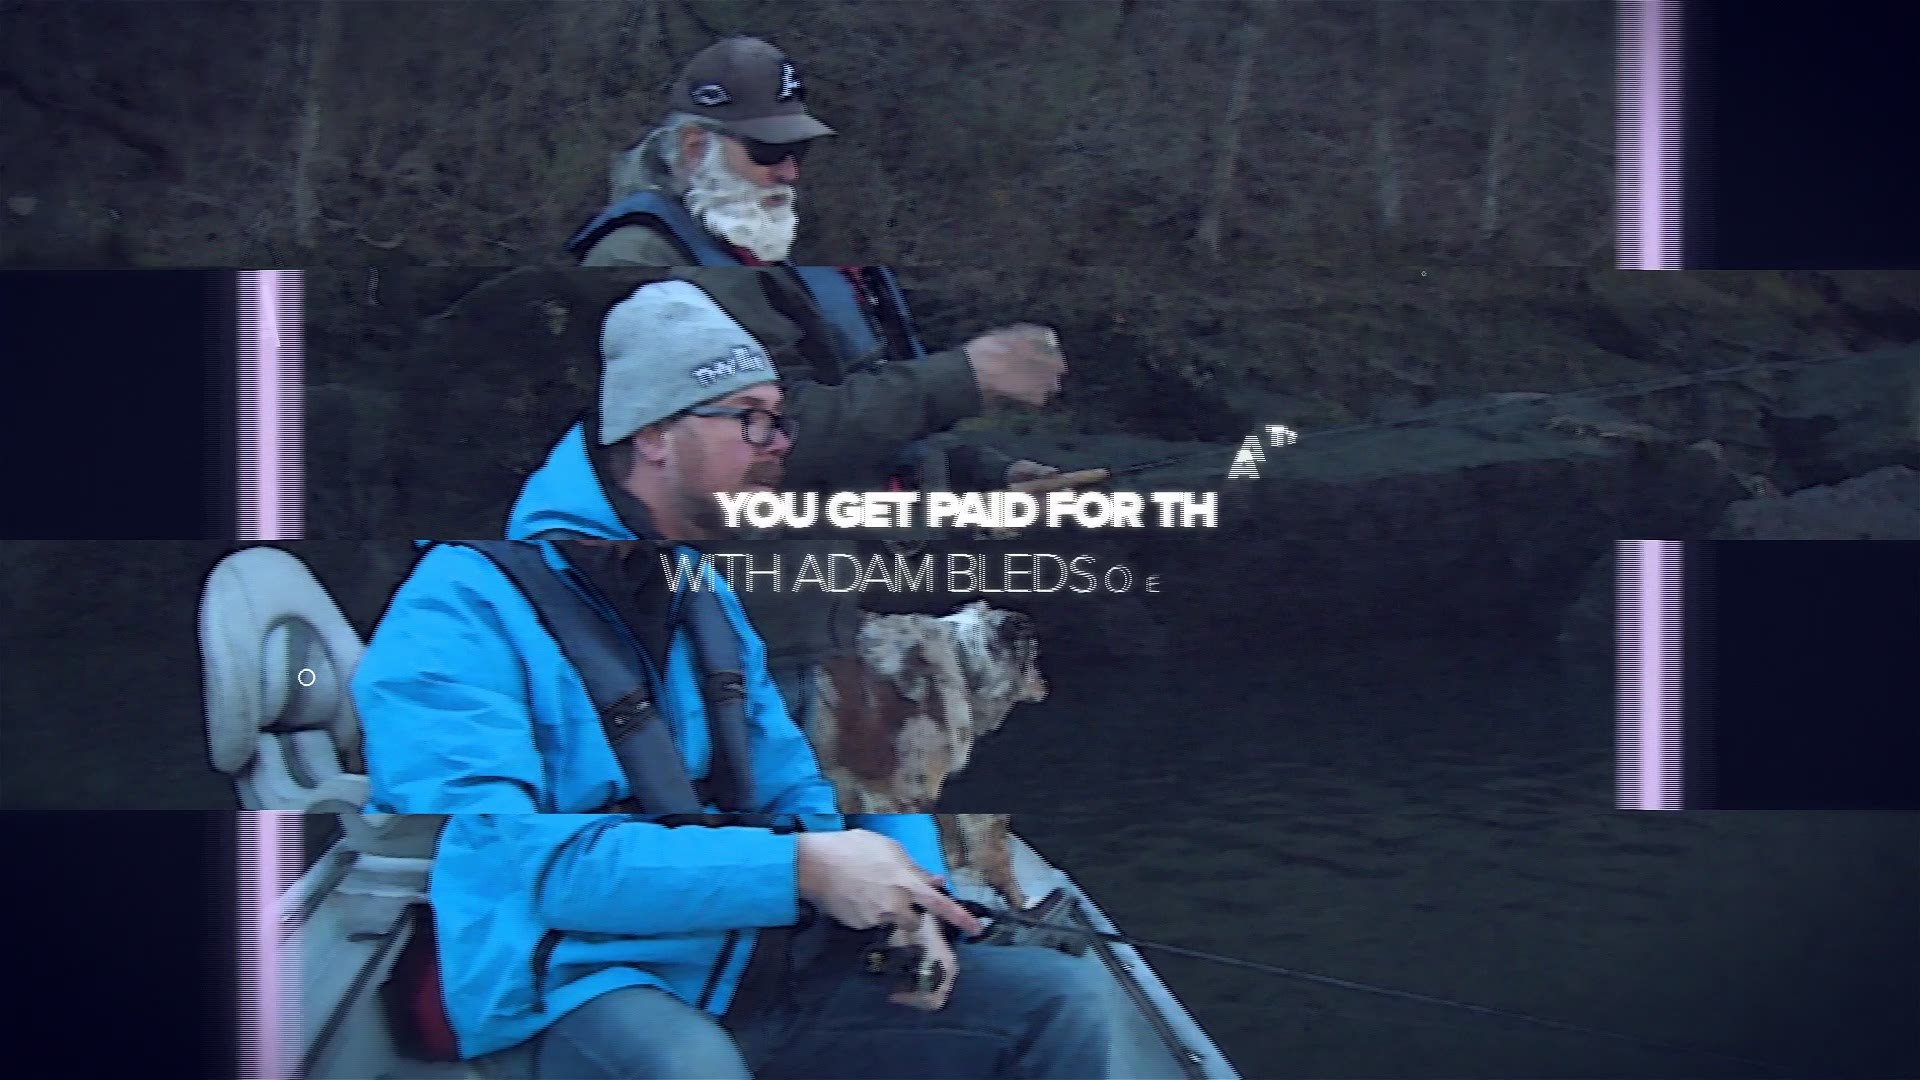 We met up with the self-proclaimed 'Mountain Man,' David Mitchell, to learn what it's like to get paid to guide others on a dream hunt or the fishing trip of a lifetime.